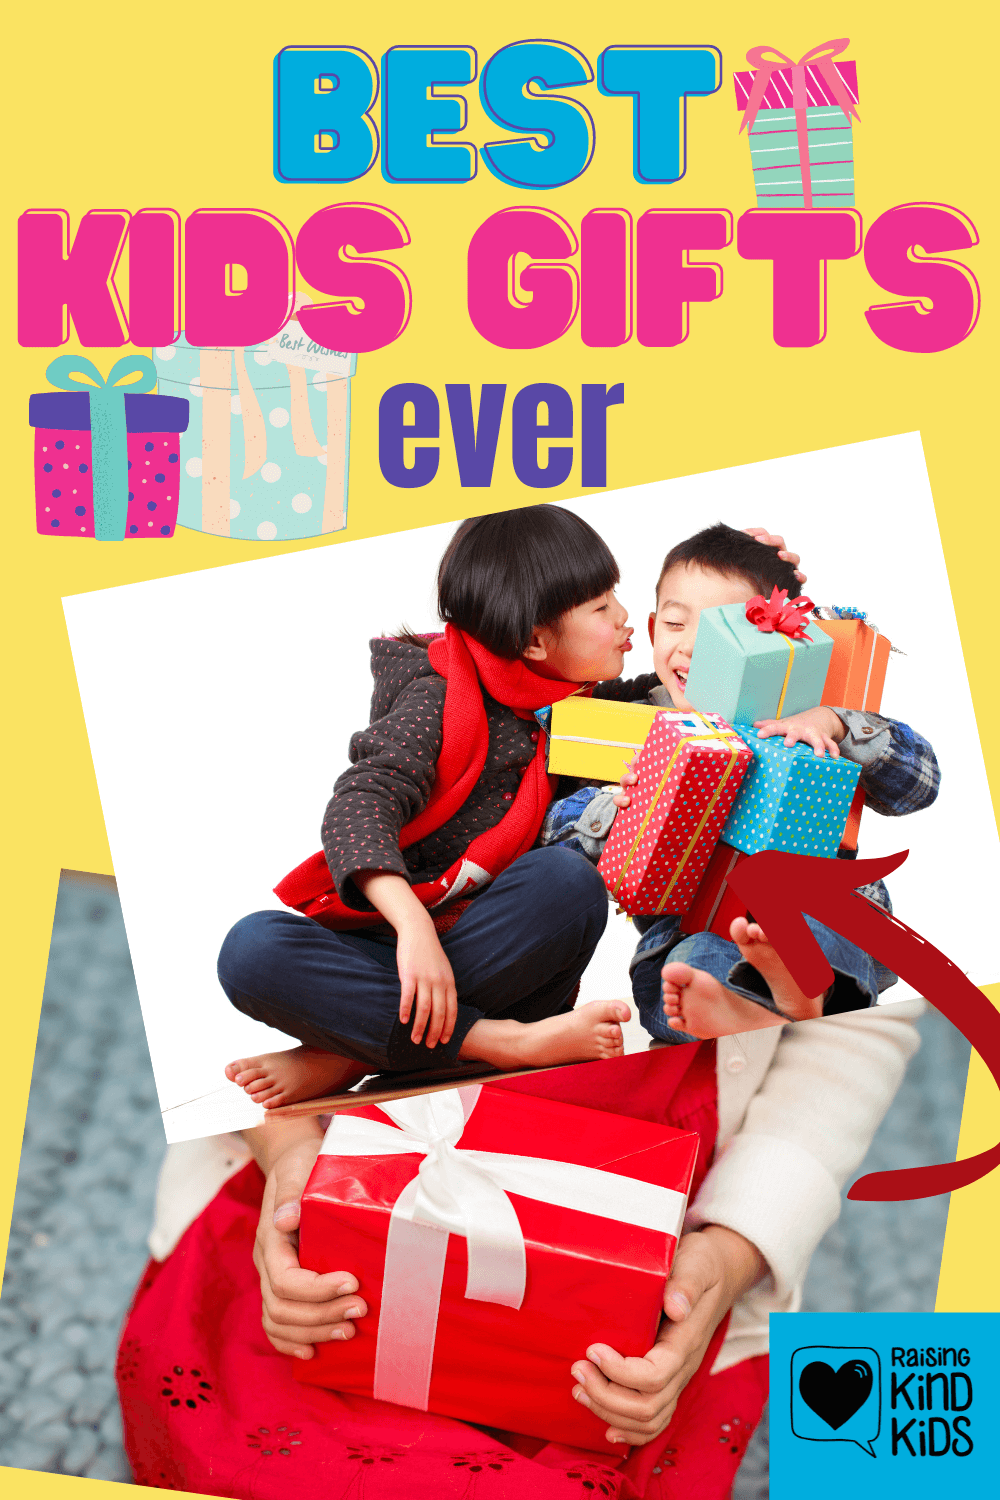 The best kids gifts ever...you'll find gifts for every kid, every interest, and every hobby on this extensive list! It's perfect for Christmas gifts for kids, Hanukkah gifts for kids, and birthday gifts for kids.